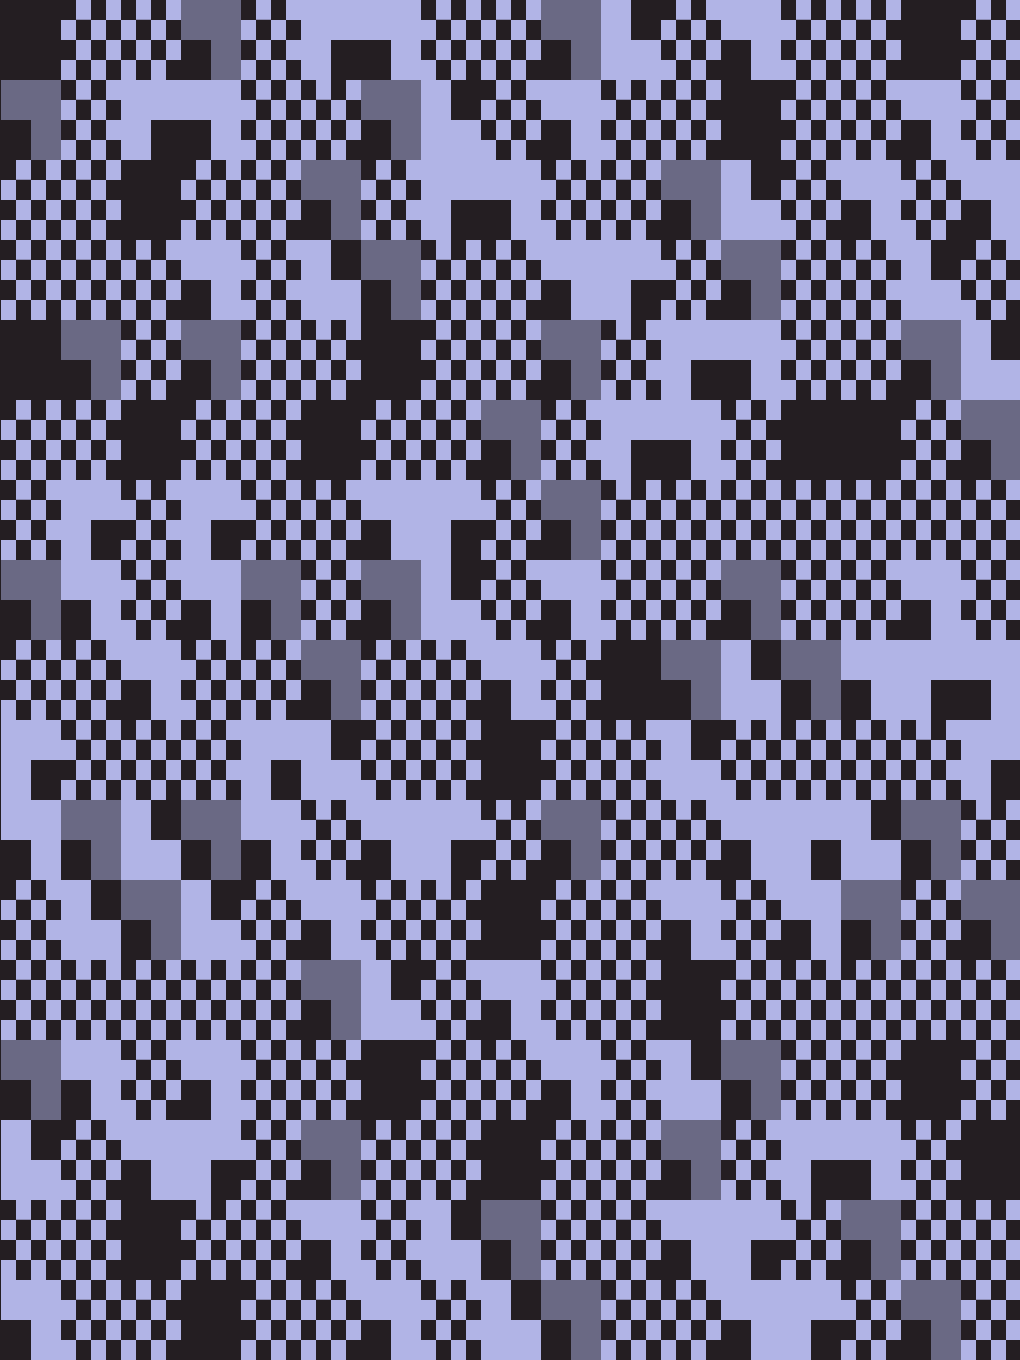 Pattern consisting of different sized rectangles